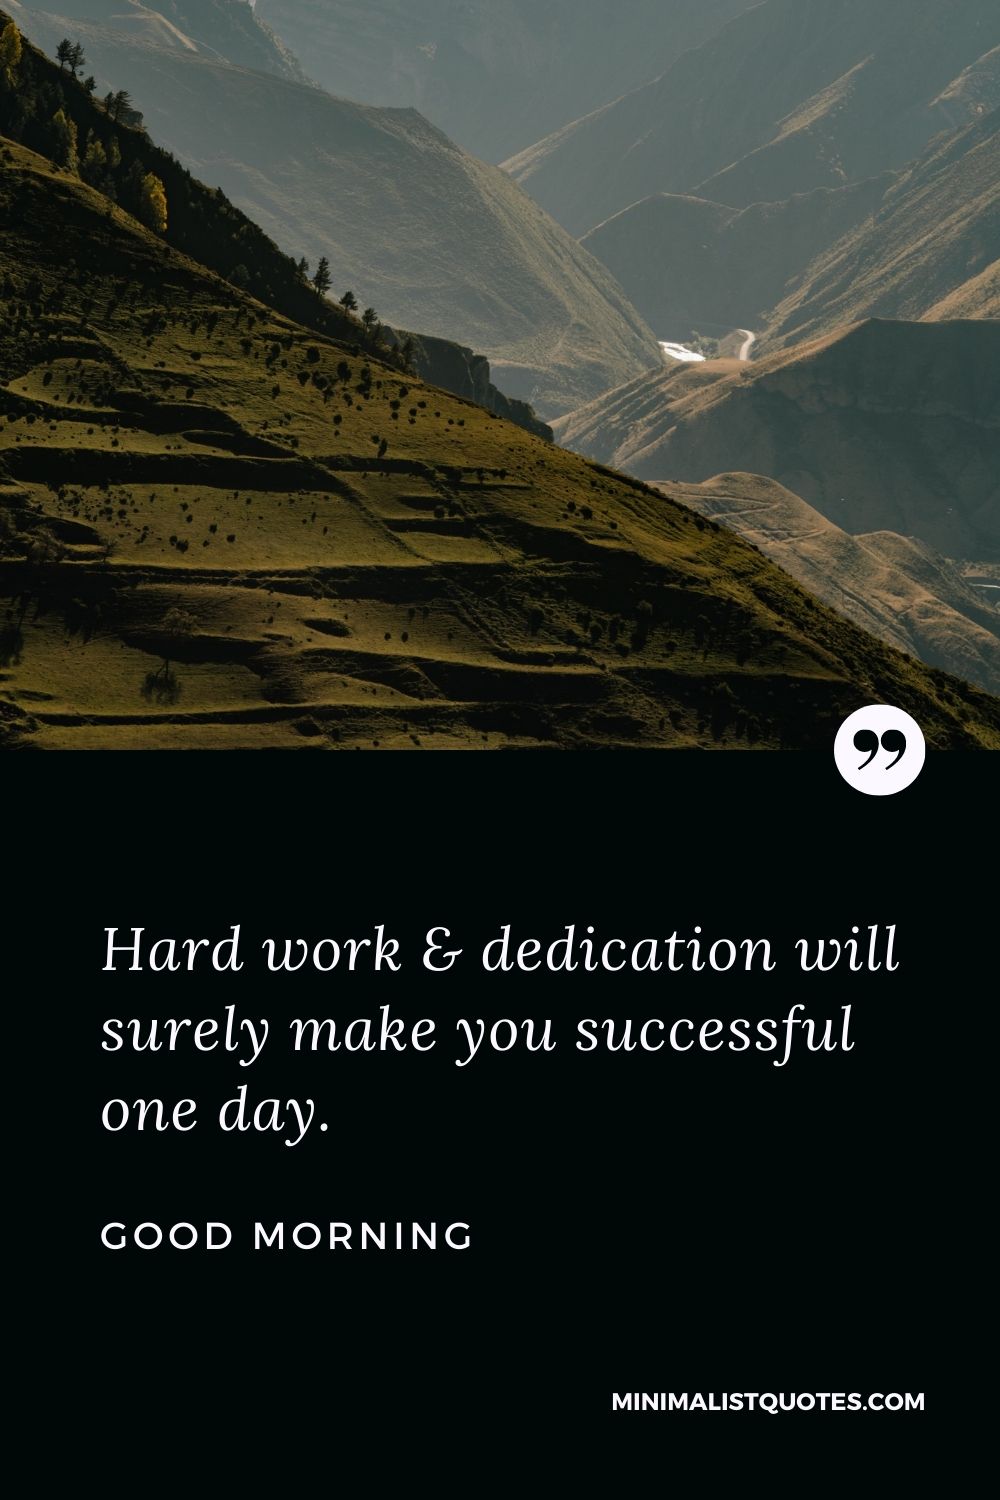 Good Morning Wish & Message With Image: Hard work & dedication will surely make you successful one day.